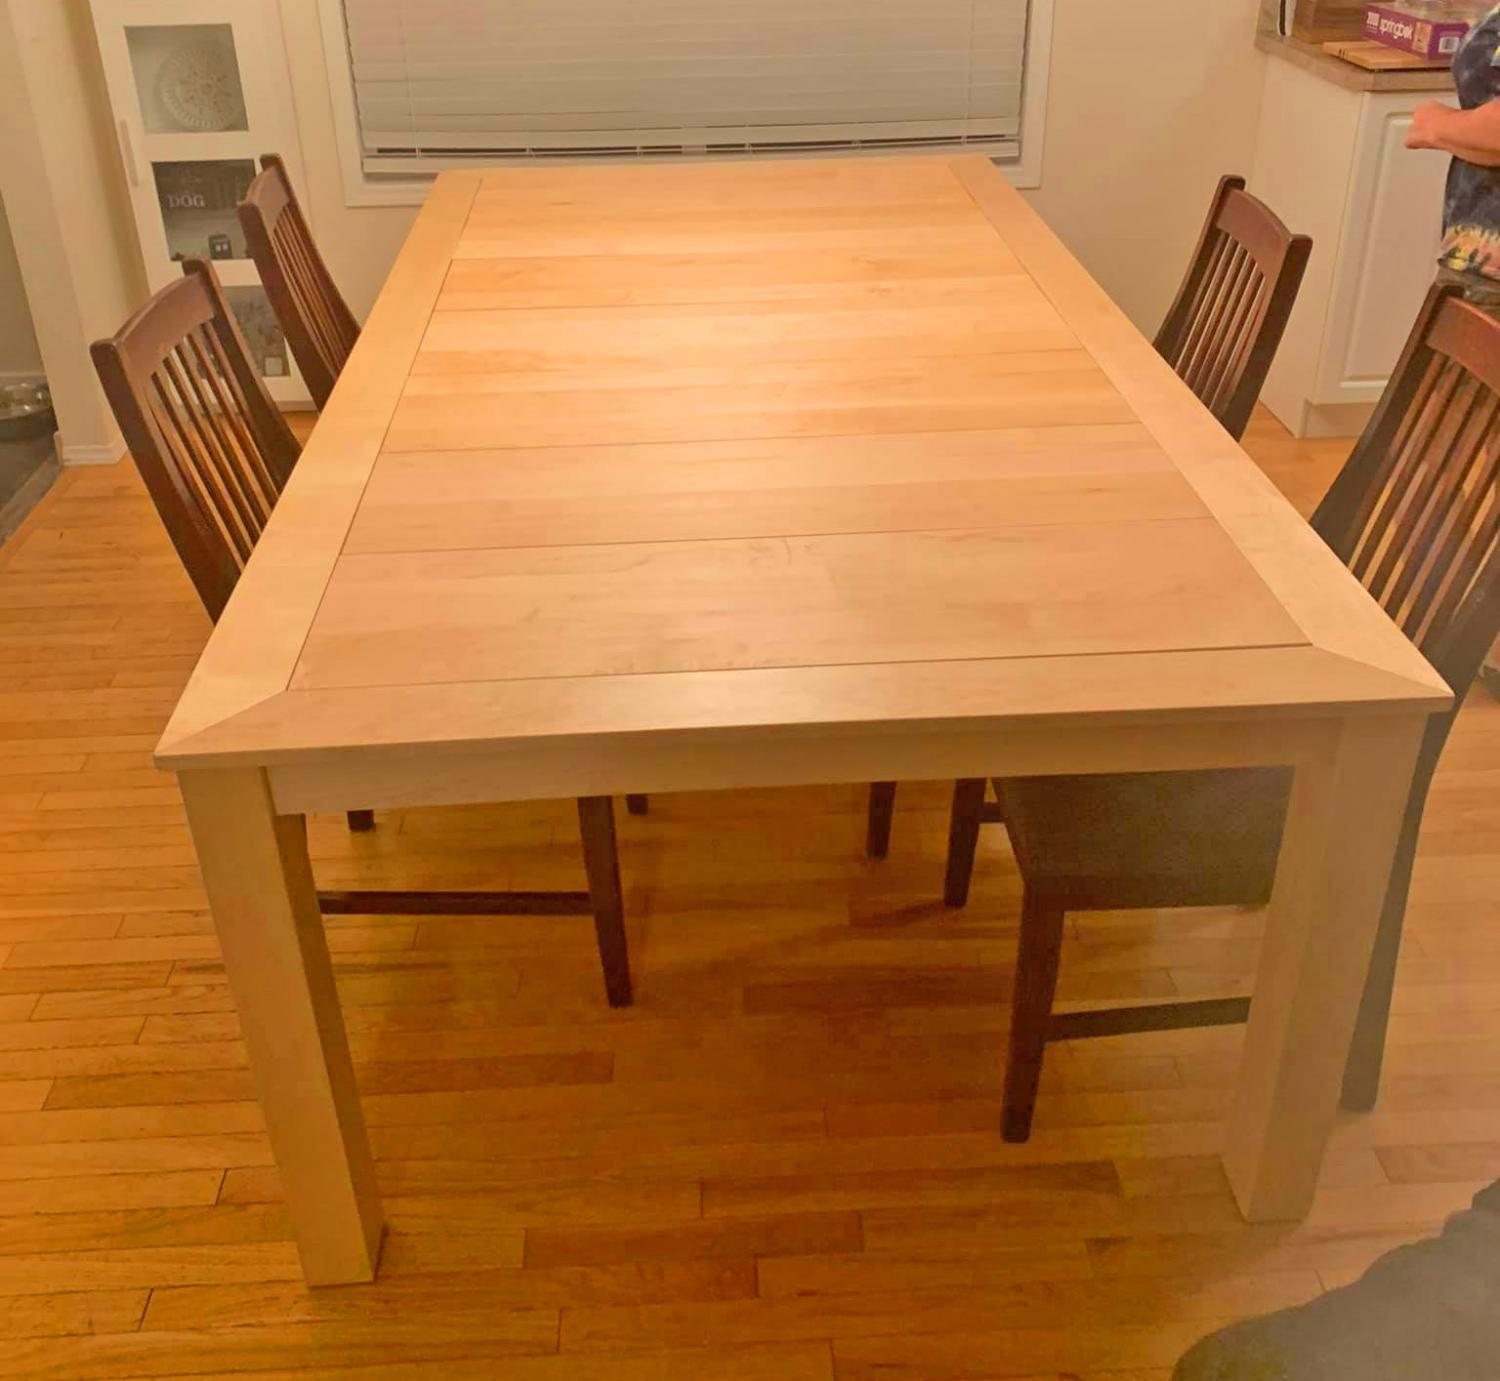 Dining Table Has a Hidden Game/Puzzle Compartment Under The Surface - Wooden custom dining table with puzzle or board game area